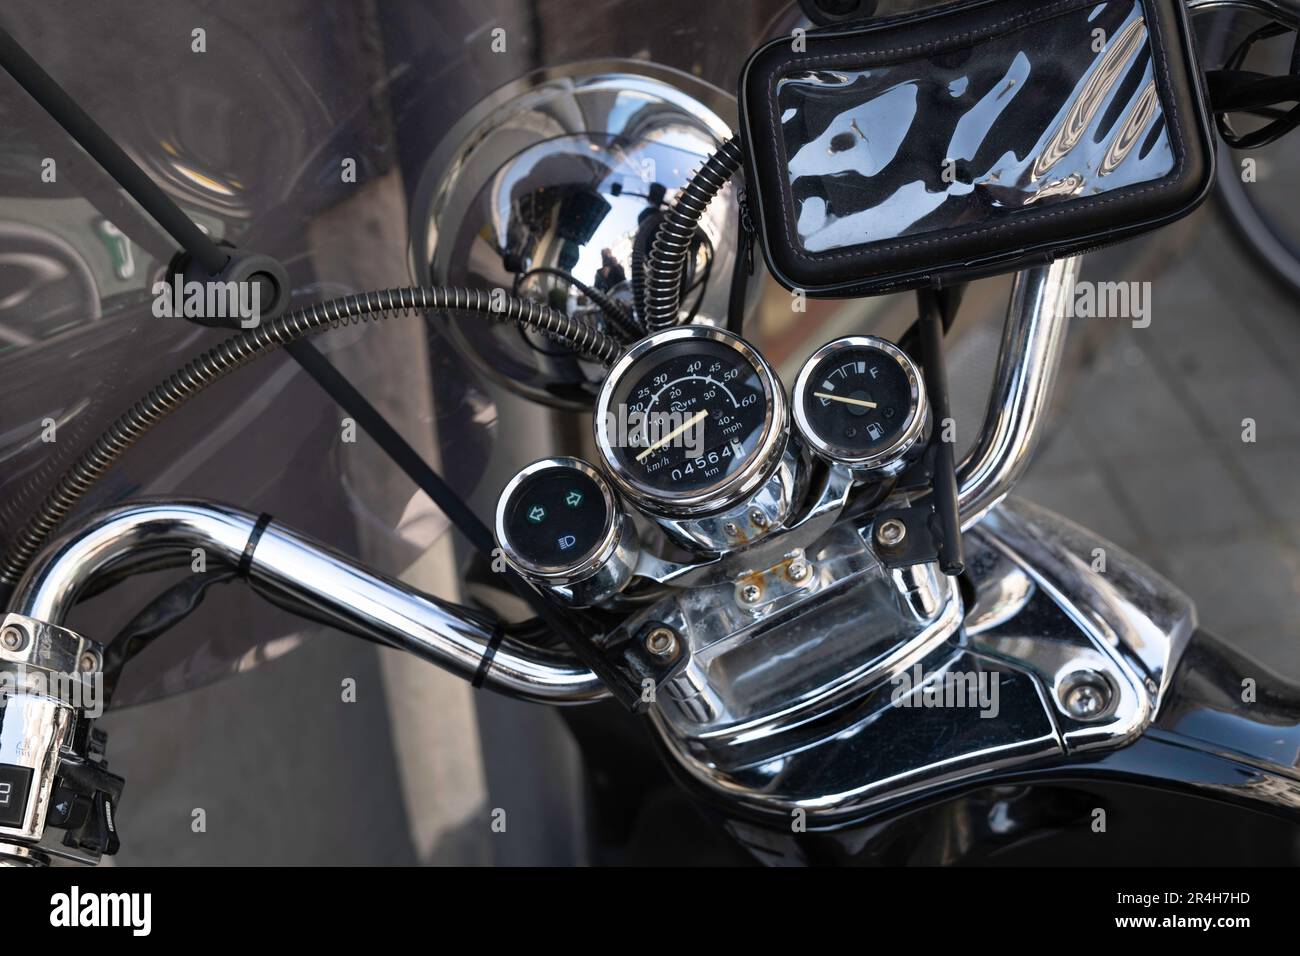 Classic motorcycle with shiny clocks, steering wheel, phone cover and other details. Seen from above, focus on the speedometer Stock Photo